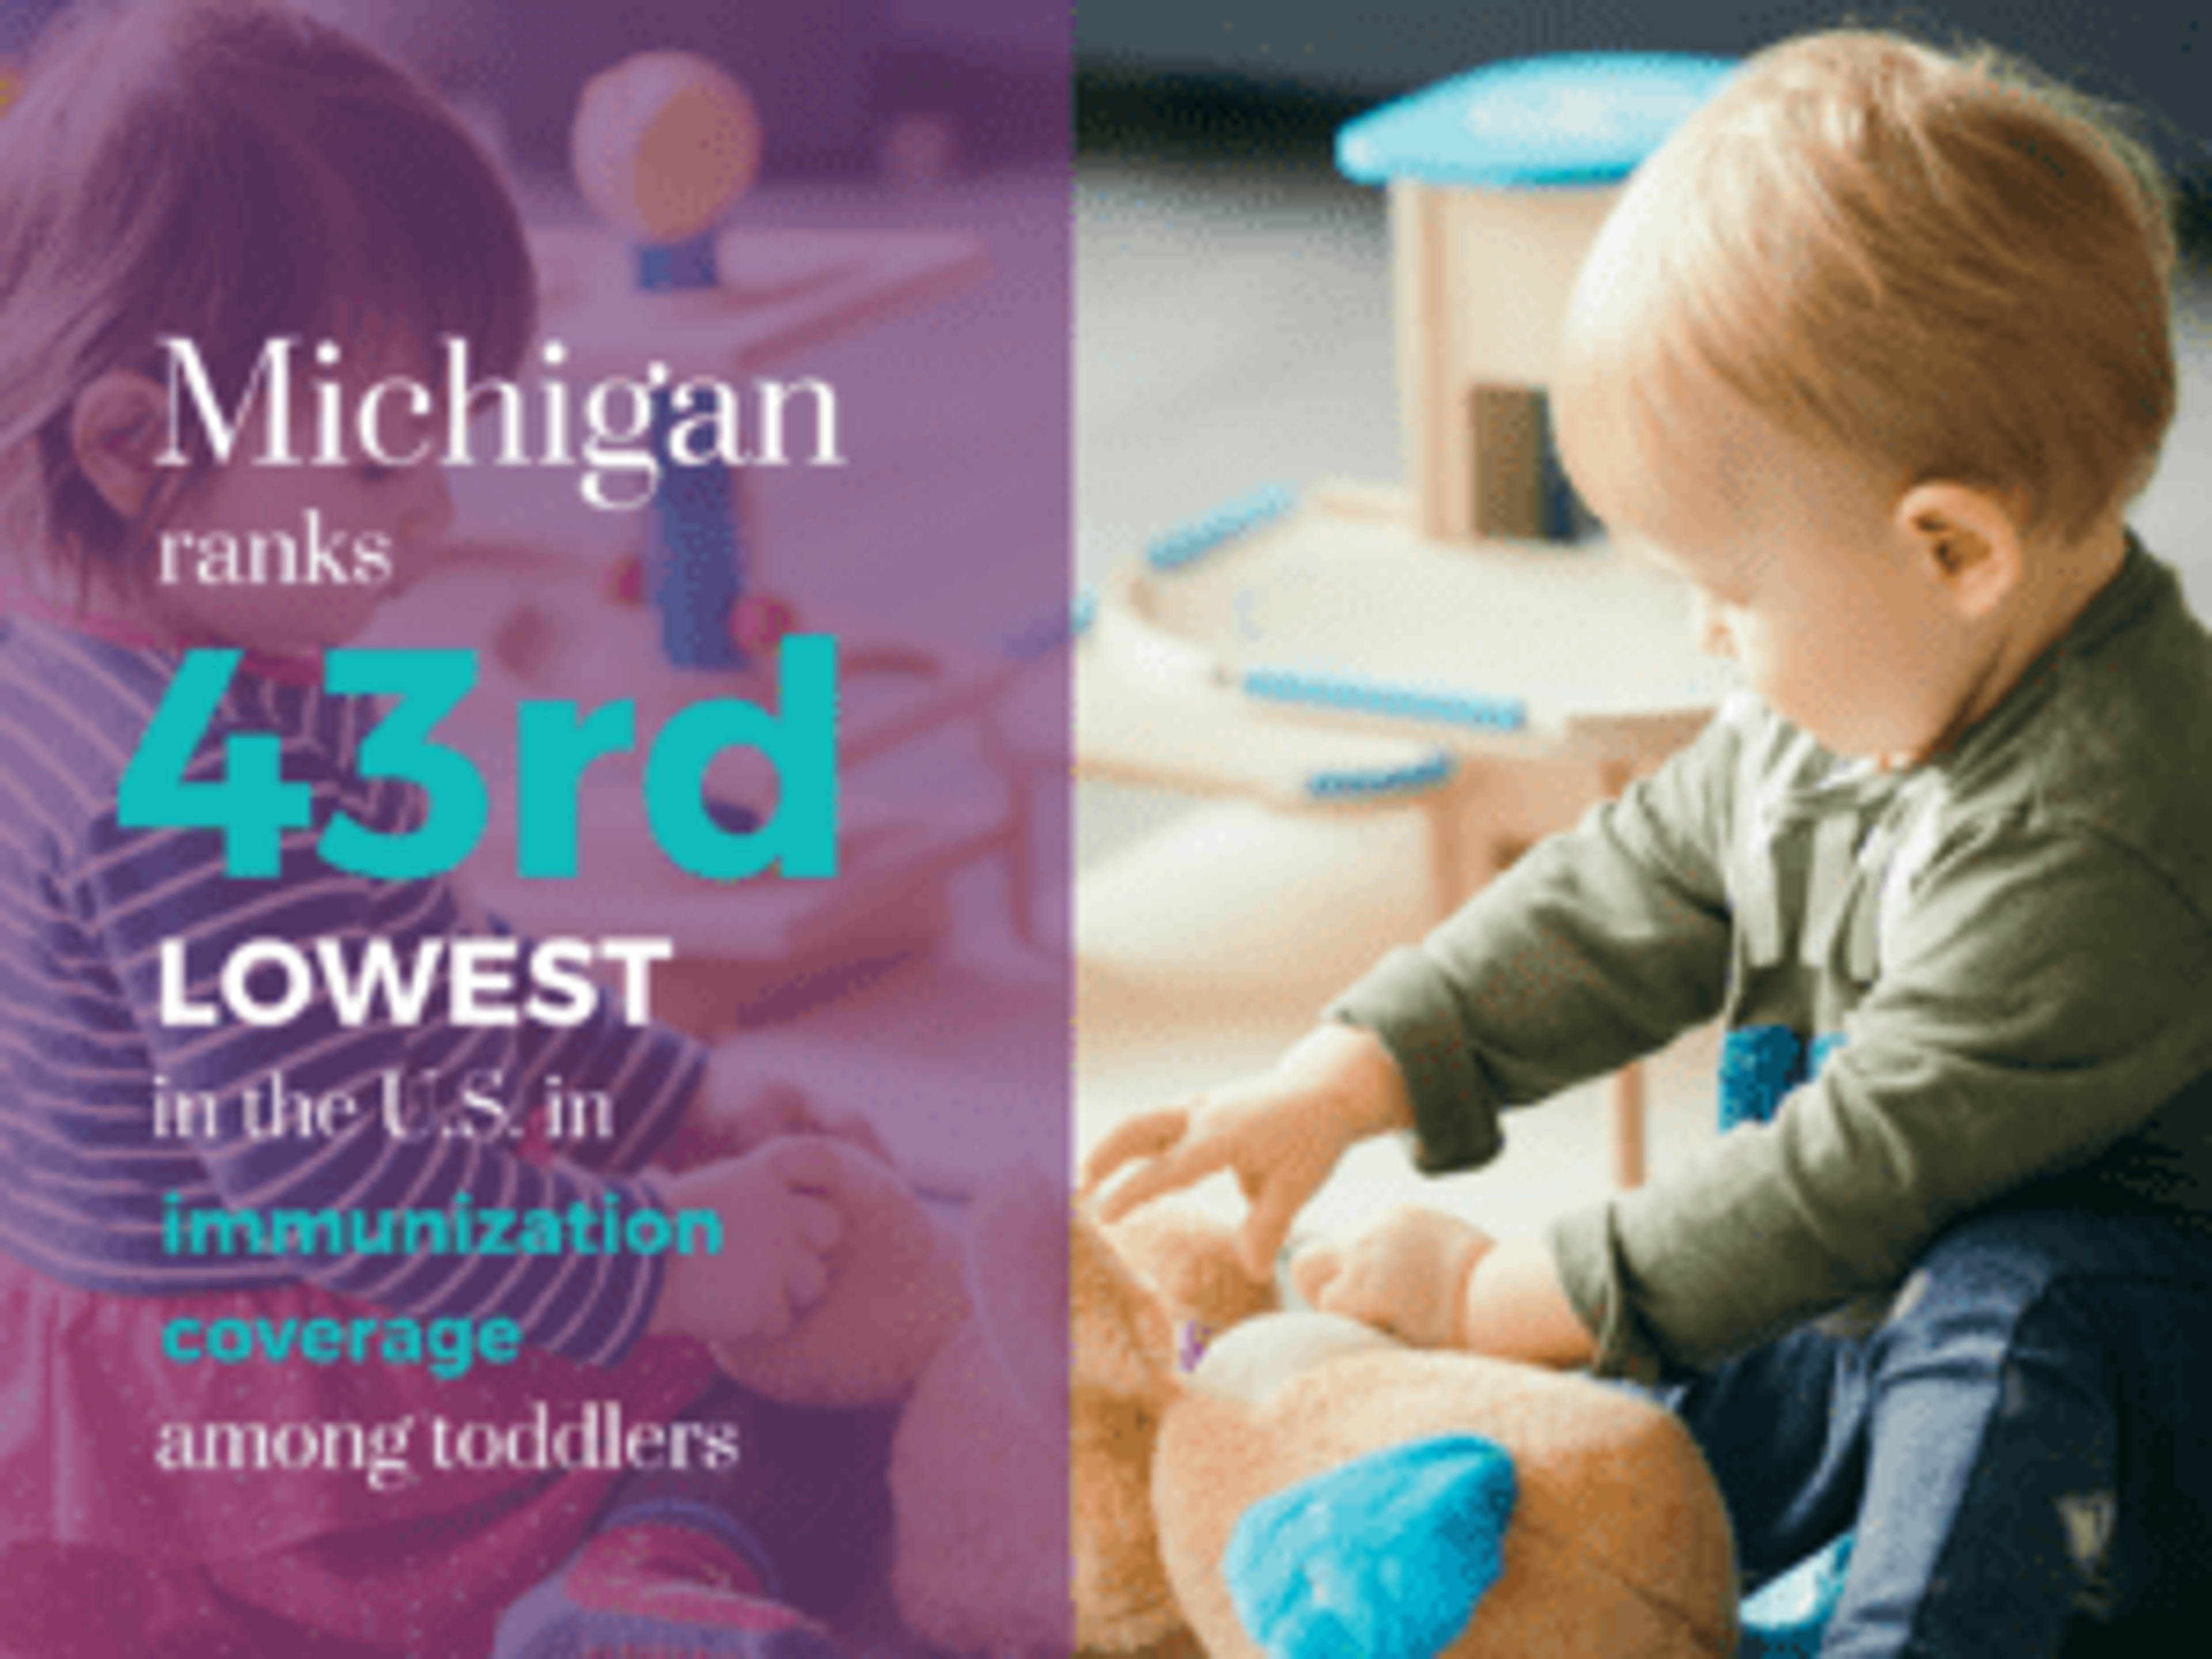 Michigan ranks 43rd lowest in the US in immunization coverage among toddlers